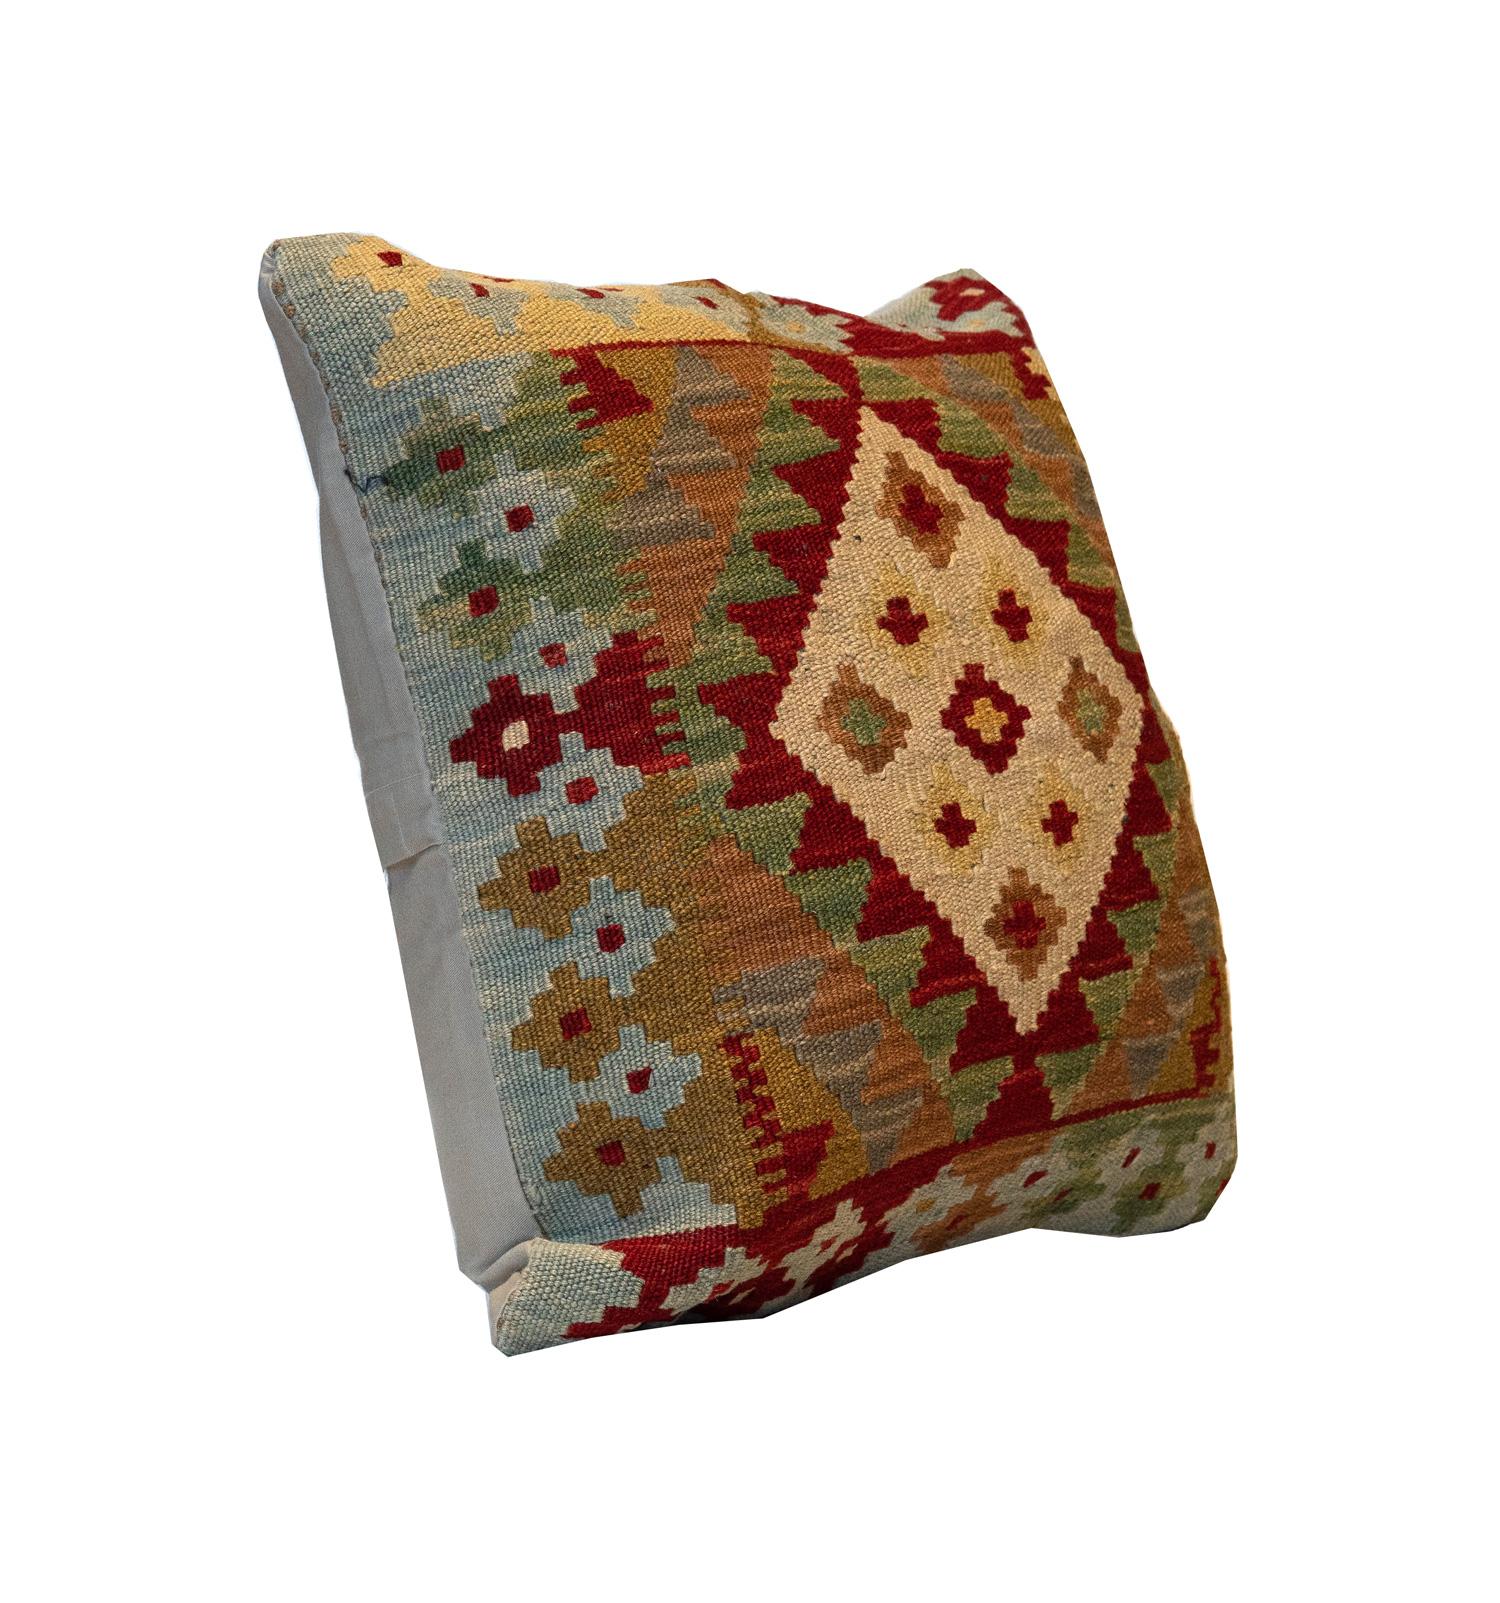 Late 20th Century Geometric Kilim Cushion Cover Beige Red Wool Handmade Scatter Pillow